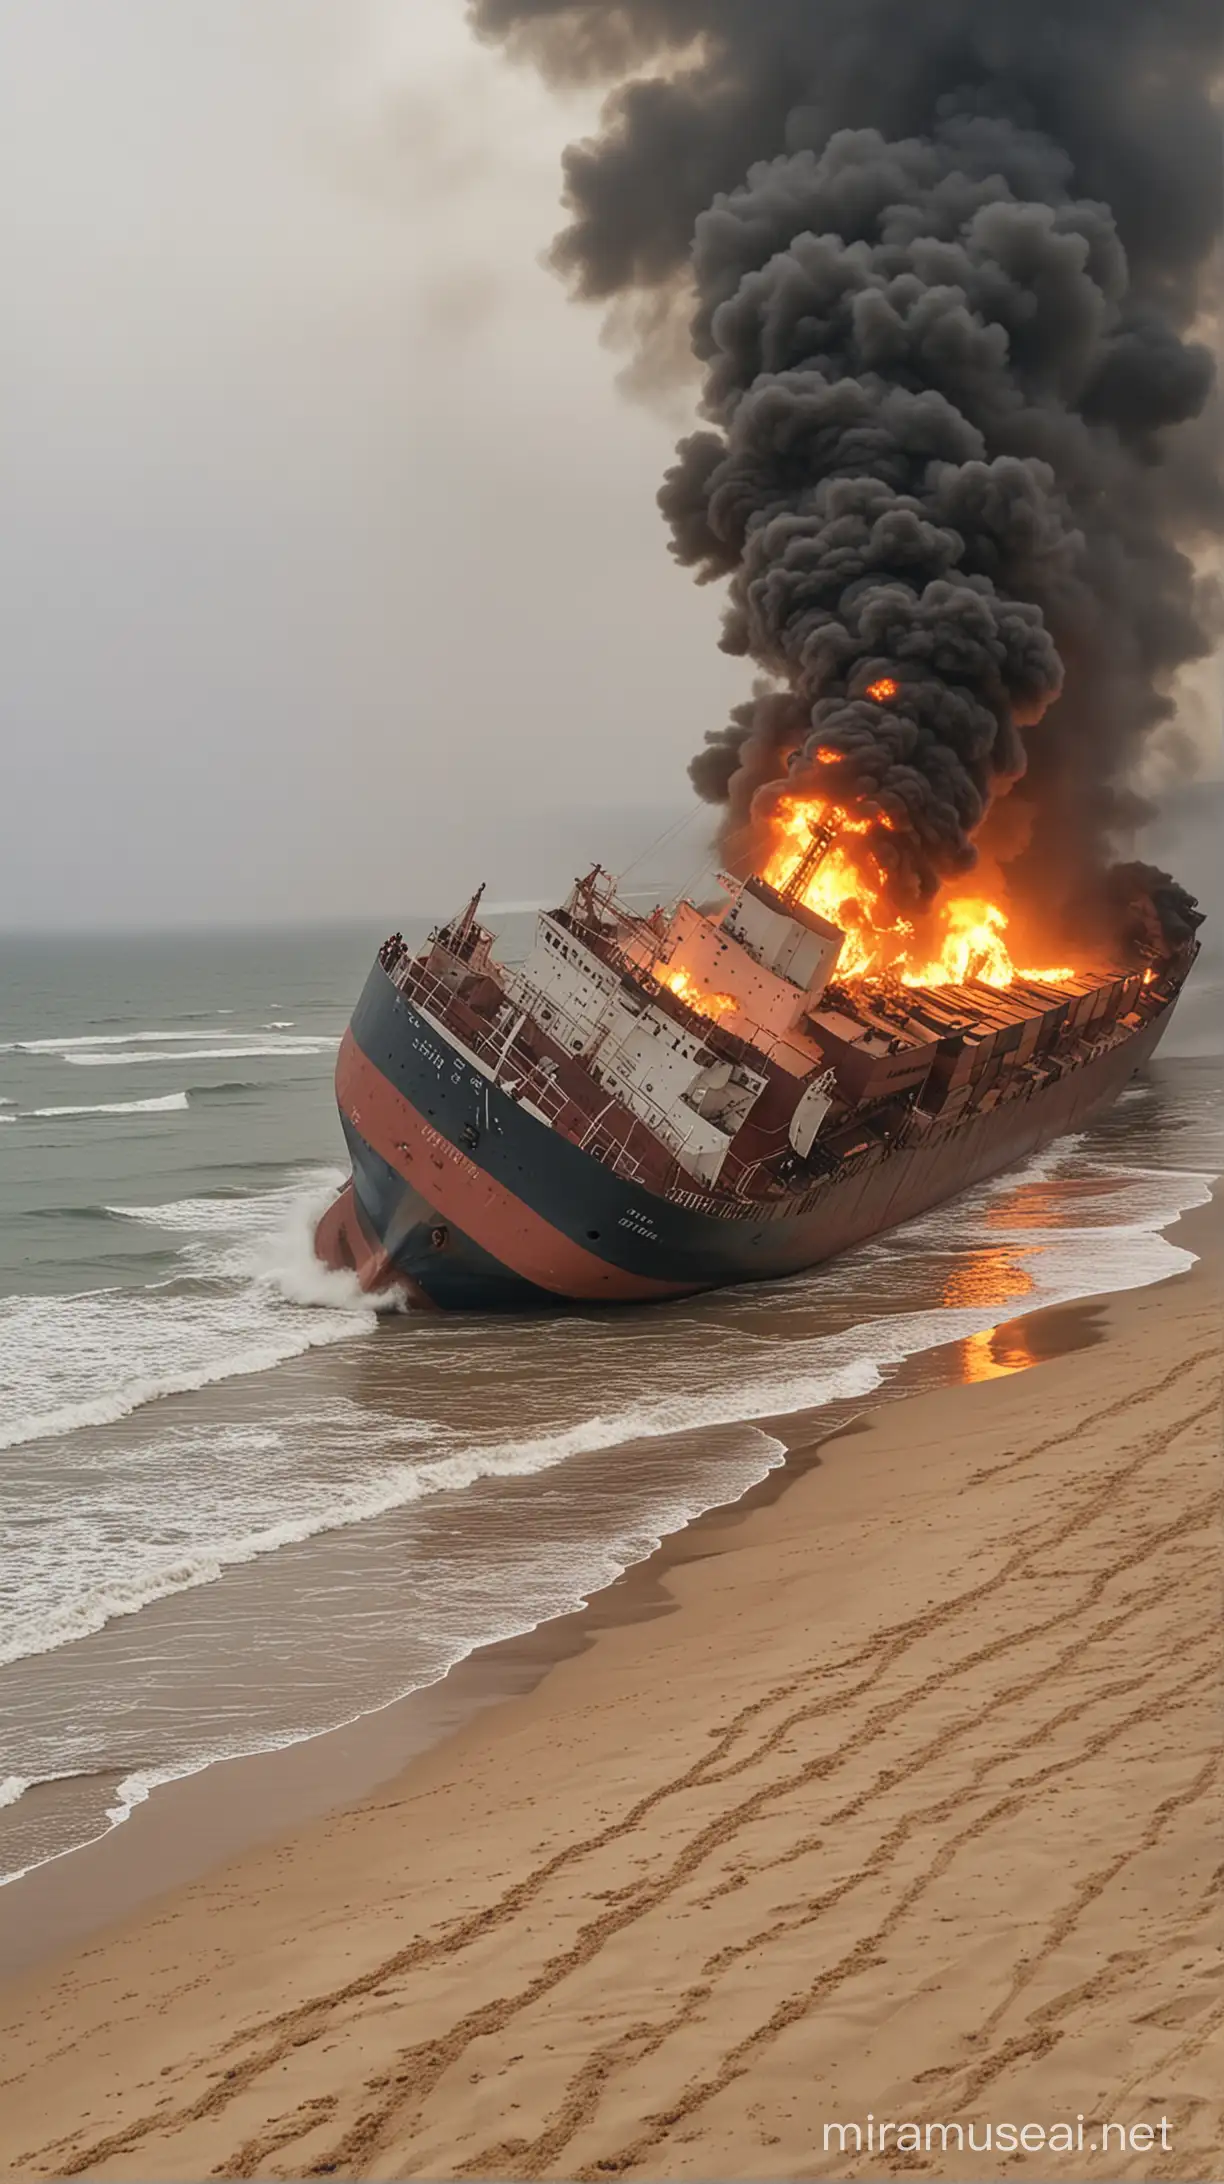 cargo ship stranded on the beach,burn,seen was many people